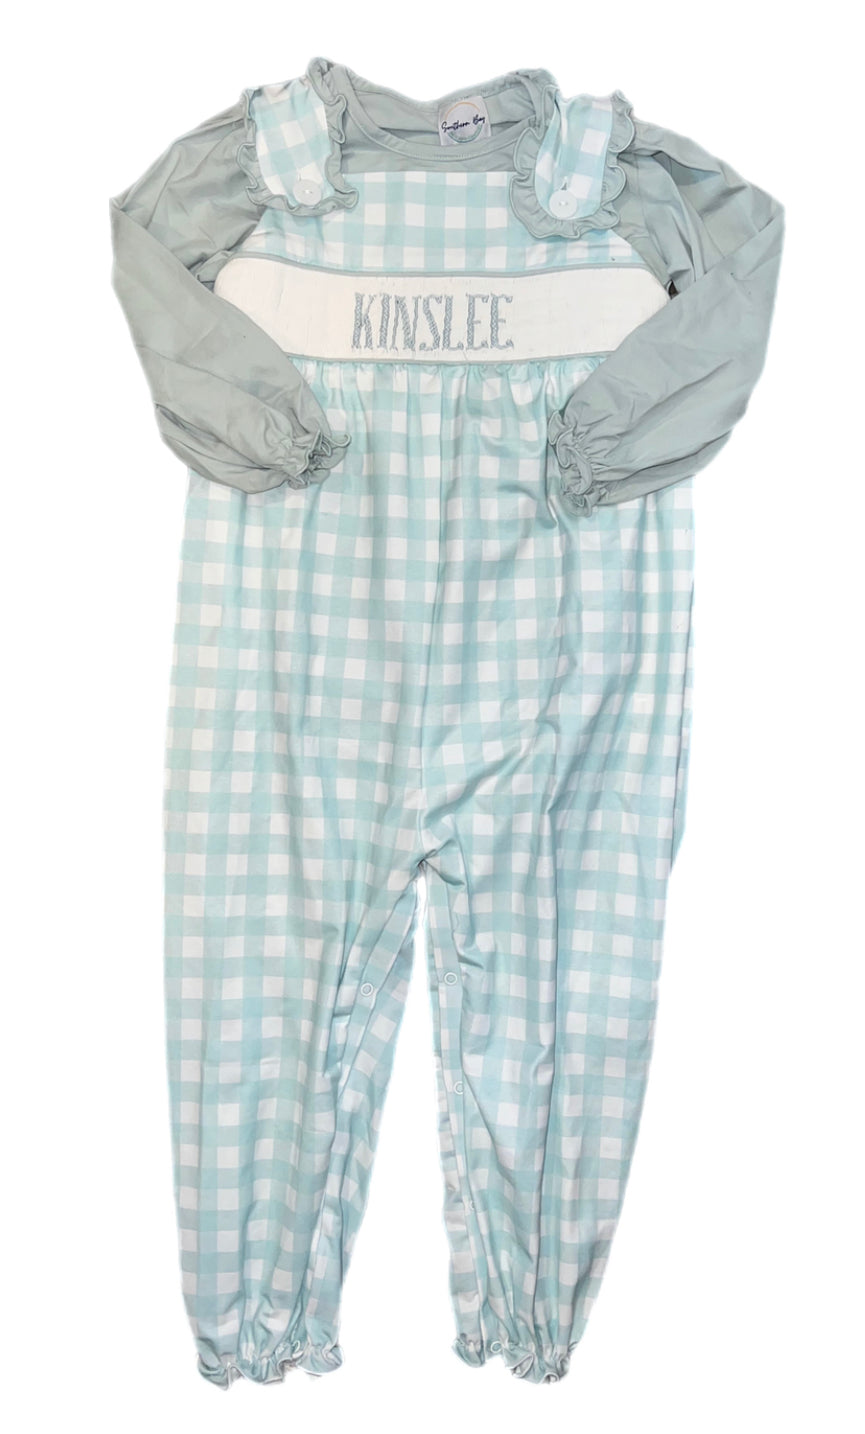 RTS: SBSC- Girls Mint Gingham Name Smock- 2pc Knit Romper “Kinslee”